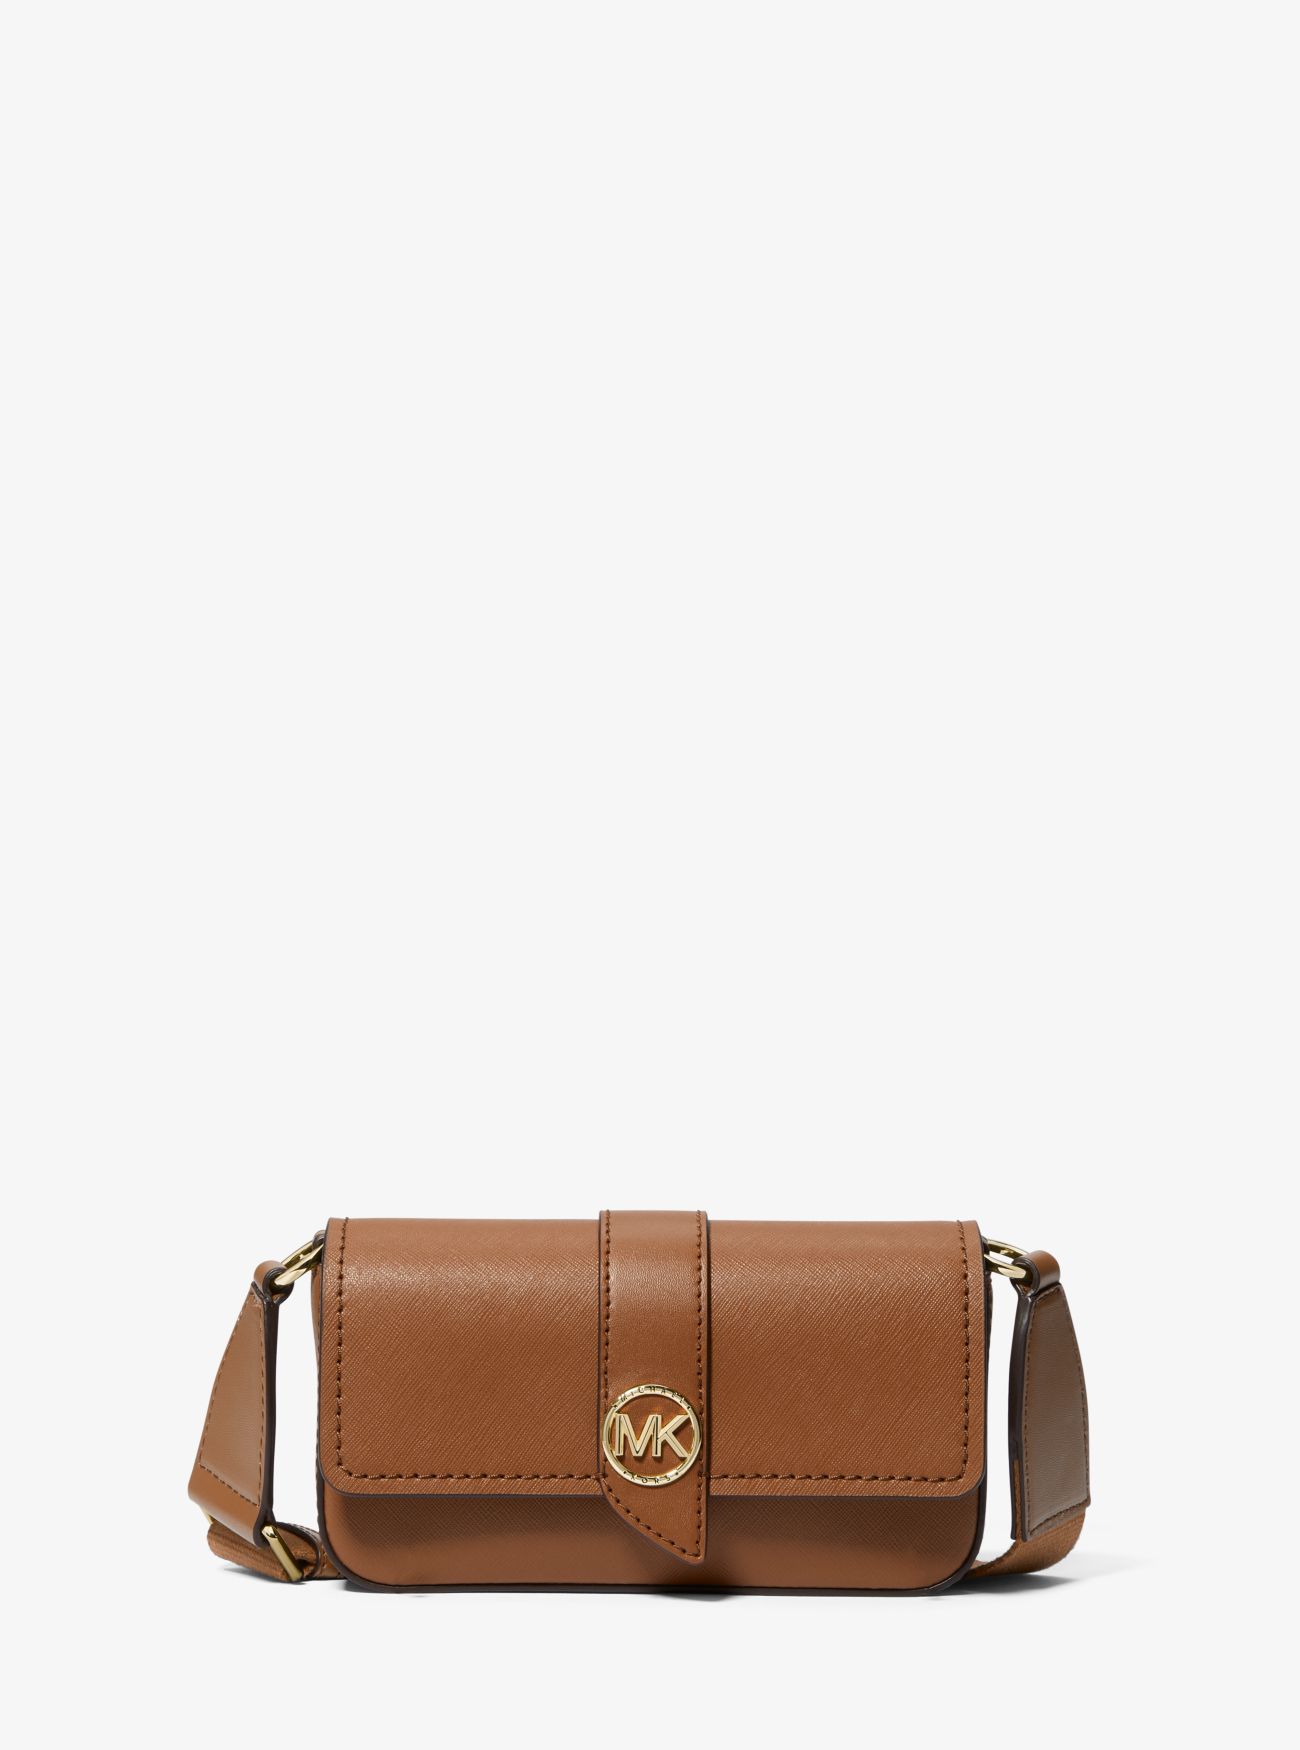 MK Greenwich Extra-Small Saffiano Leather Sling Crossbody Bag - Brown - Michael Kors